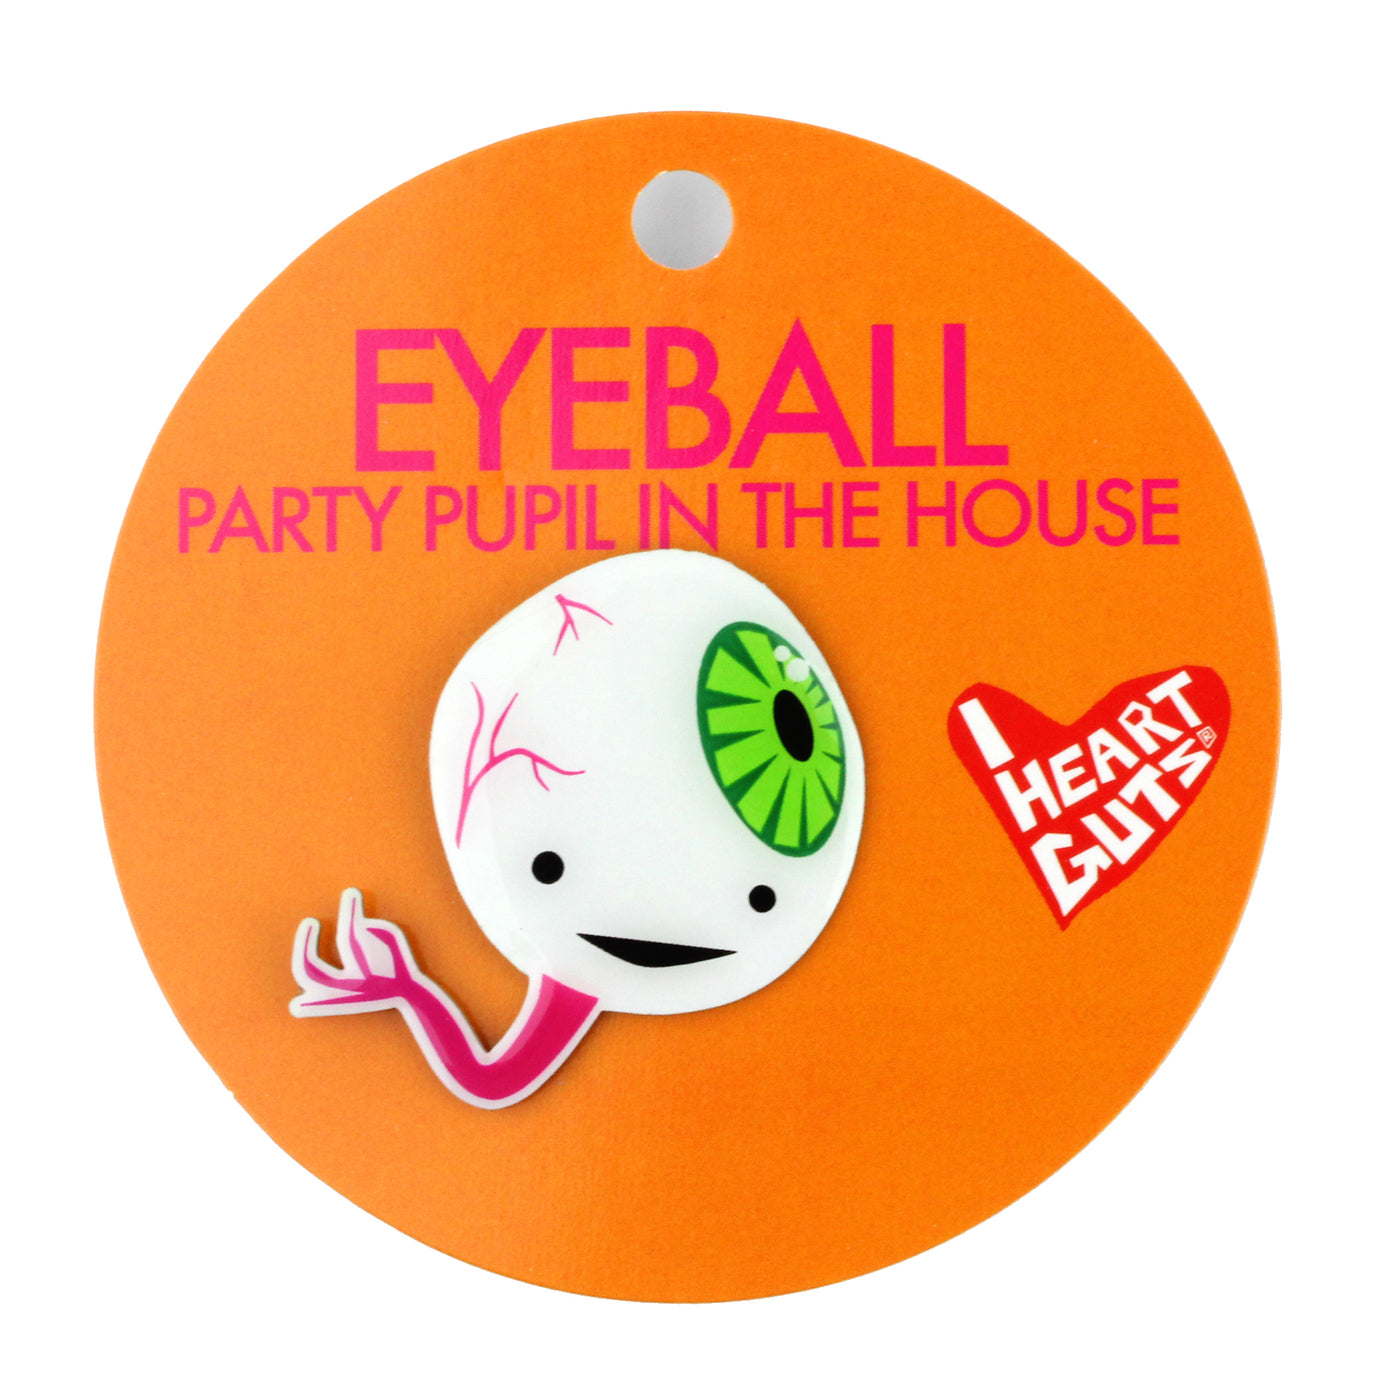 Eyeball Lapel Pin - Party Pupil in the House!